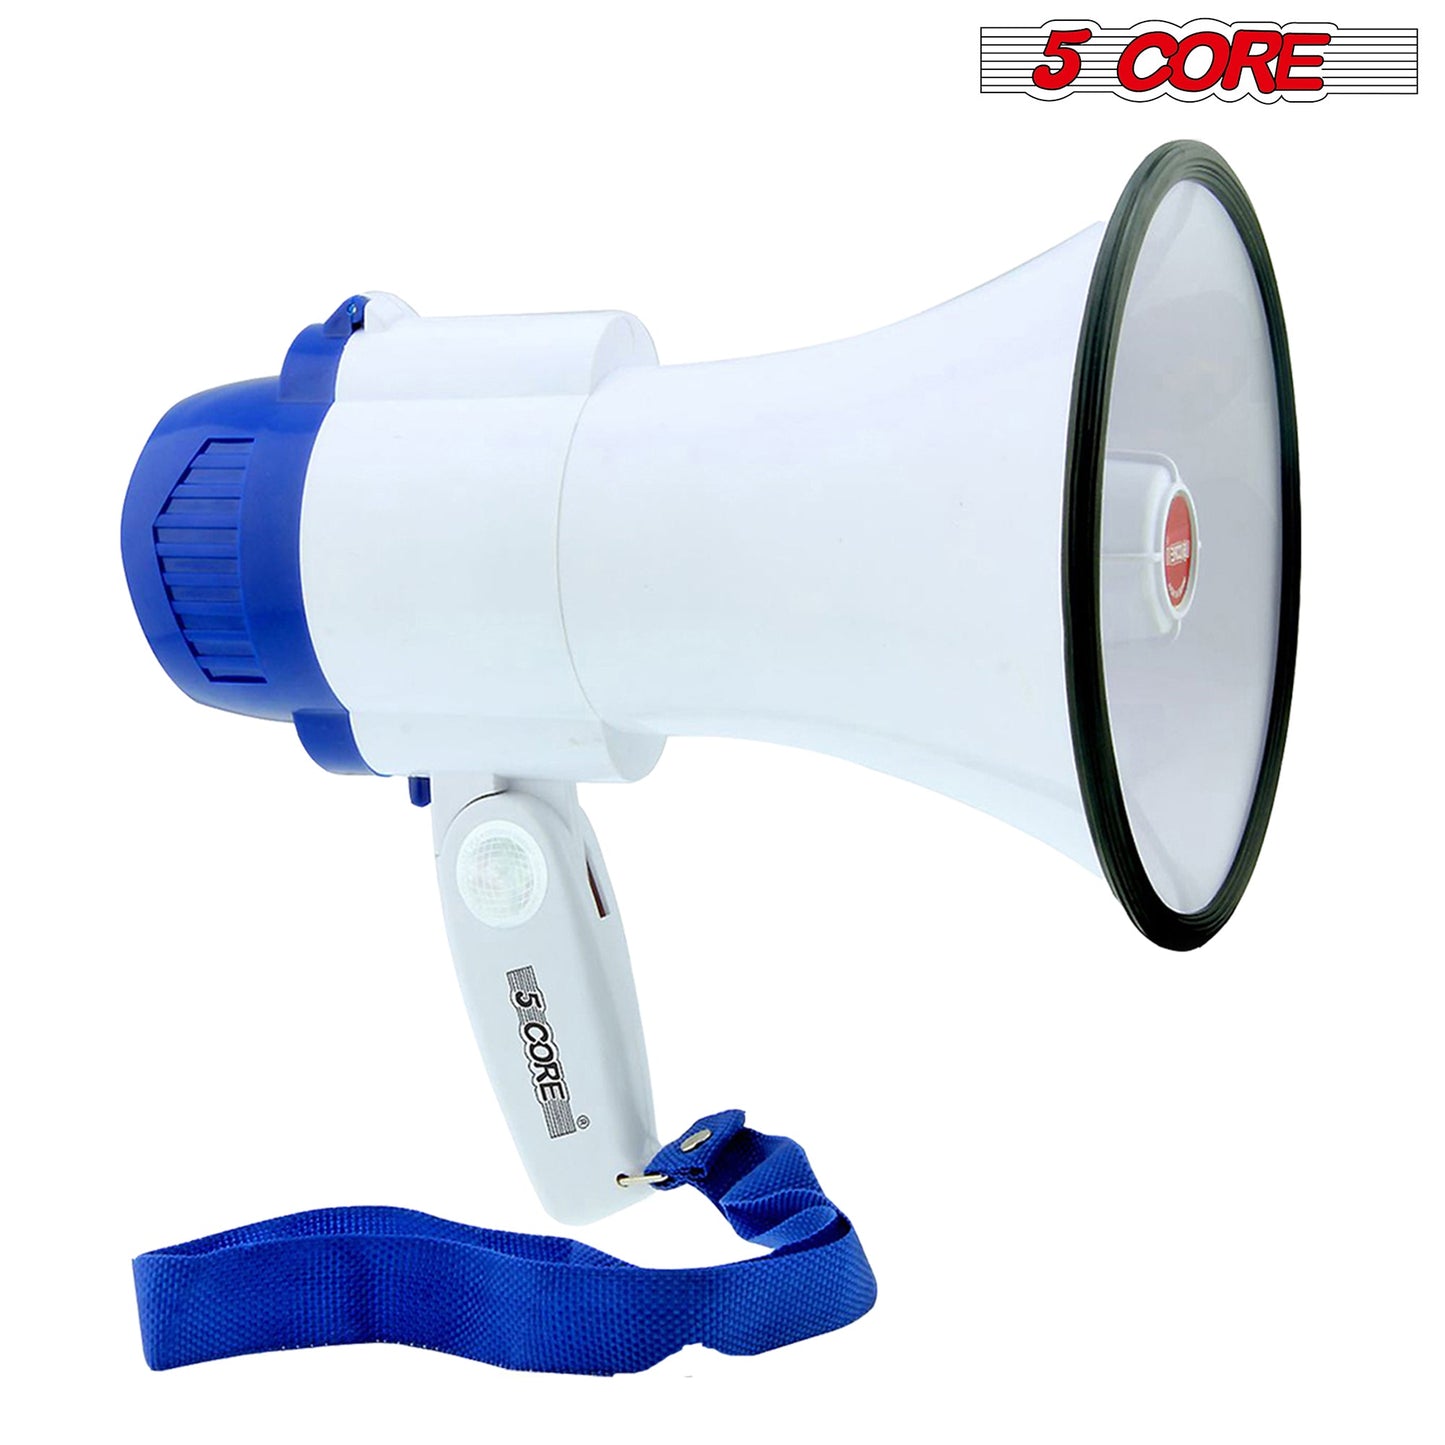 Megaphone 10W Voice Amplifier White-Blue| Cheer Megaphone with USB, SD Card Input| Recording, Volume Control, and Siren Alarm| Rechargable Battery | Bullhorn Speaker with Strap- 8R-USB-WB